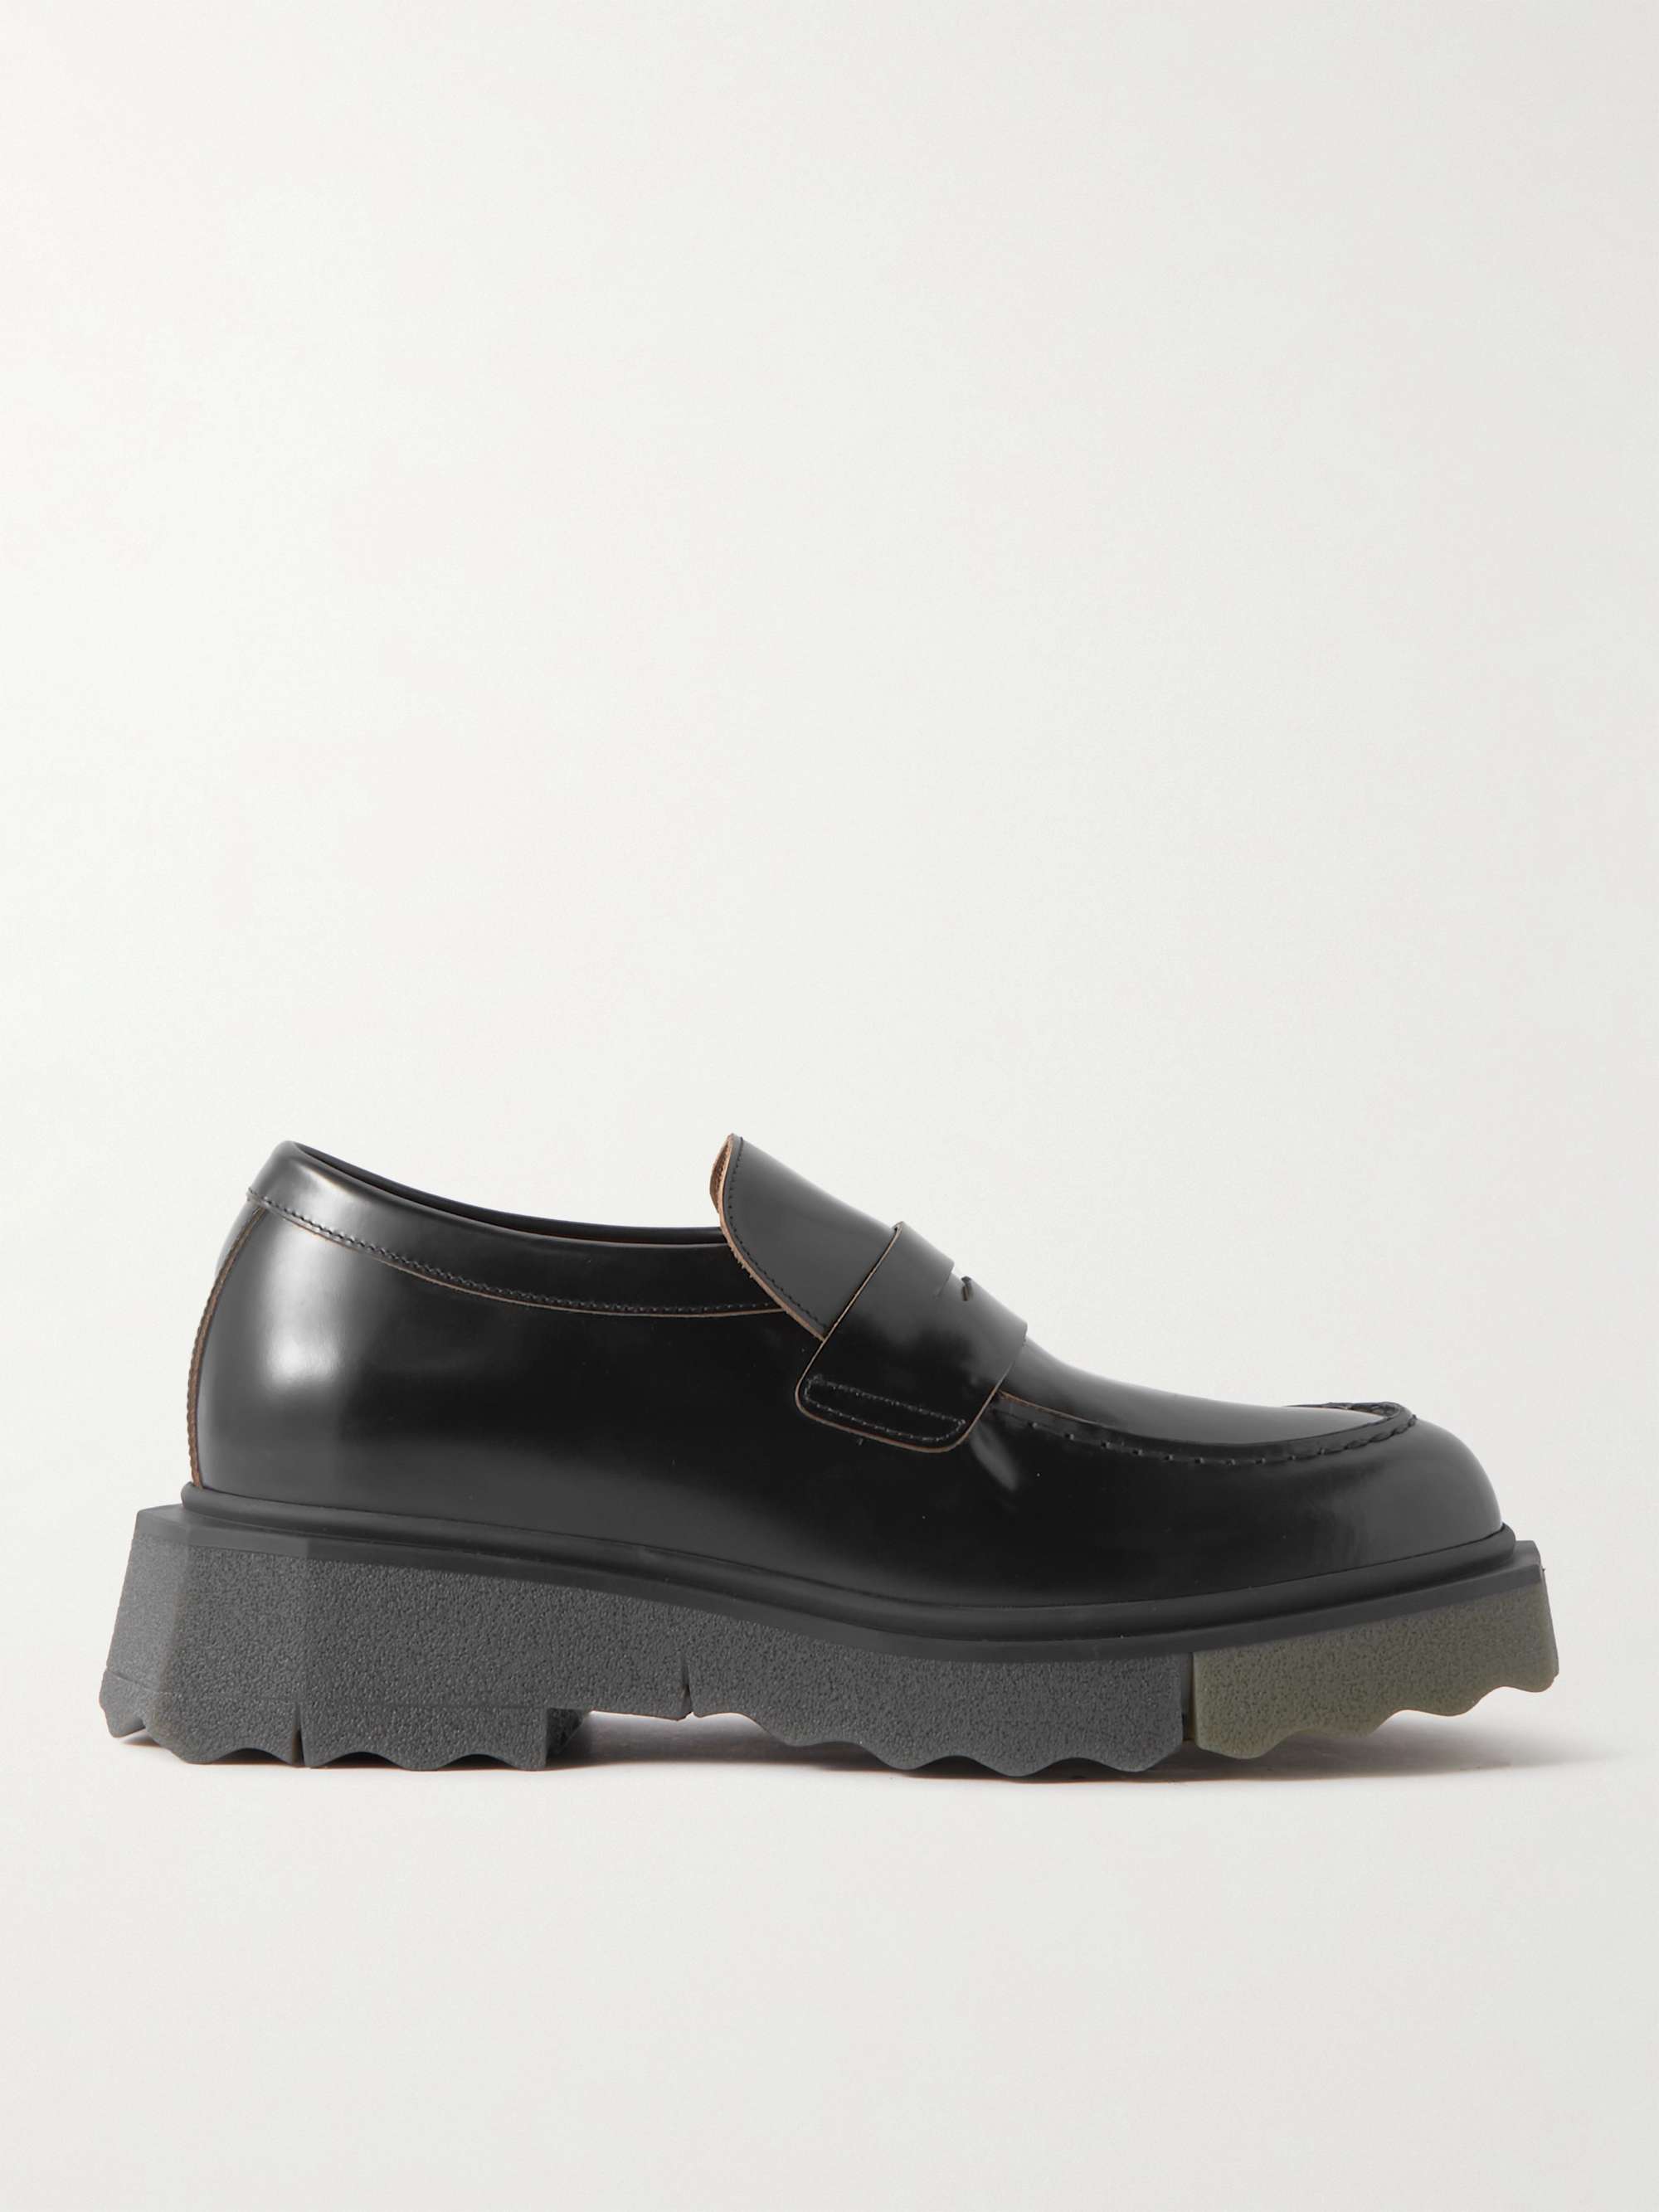 OFF-WHITE Leather Penny Loafers for Men | MR PORTER